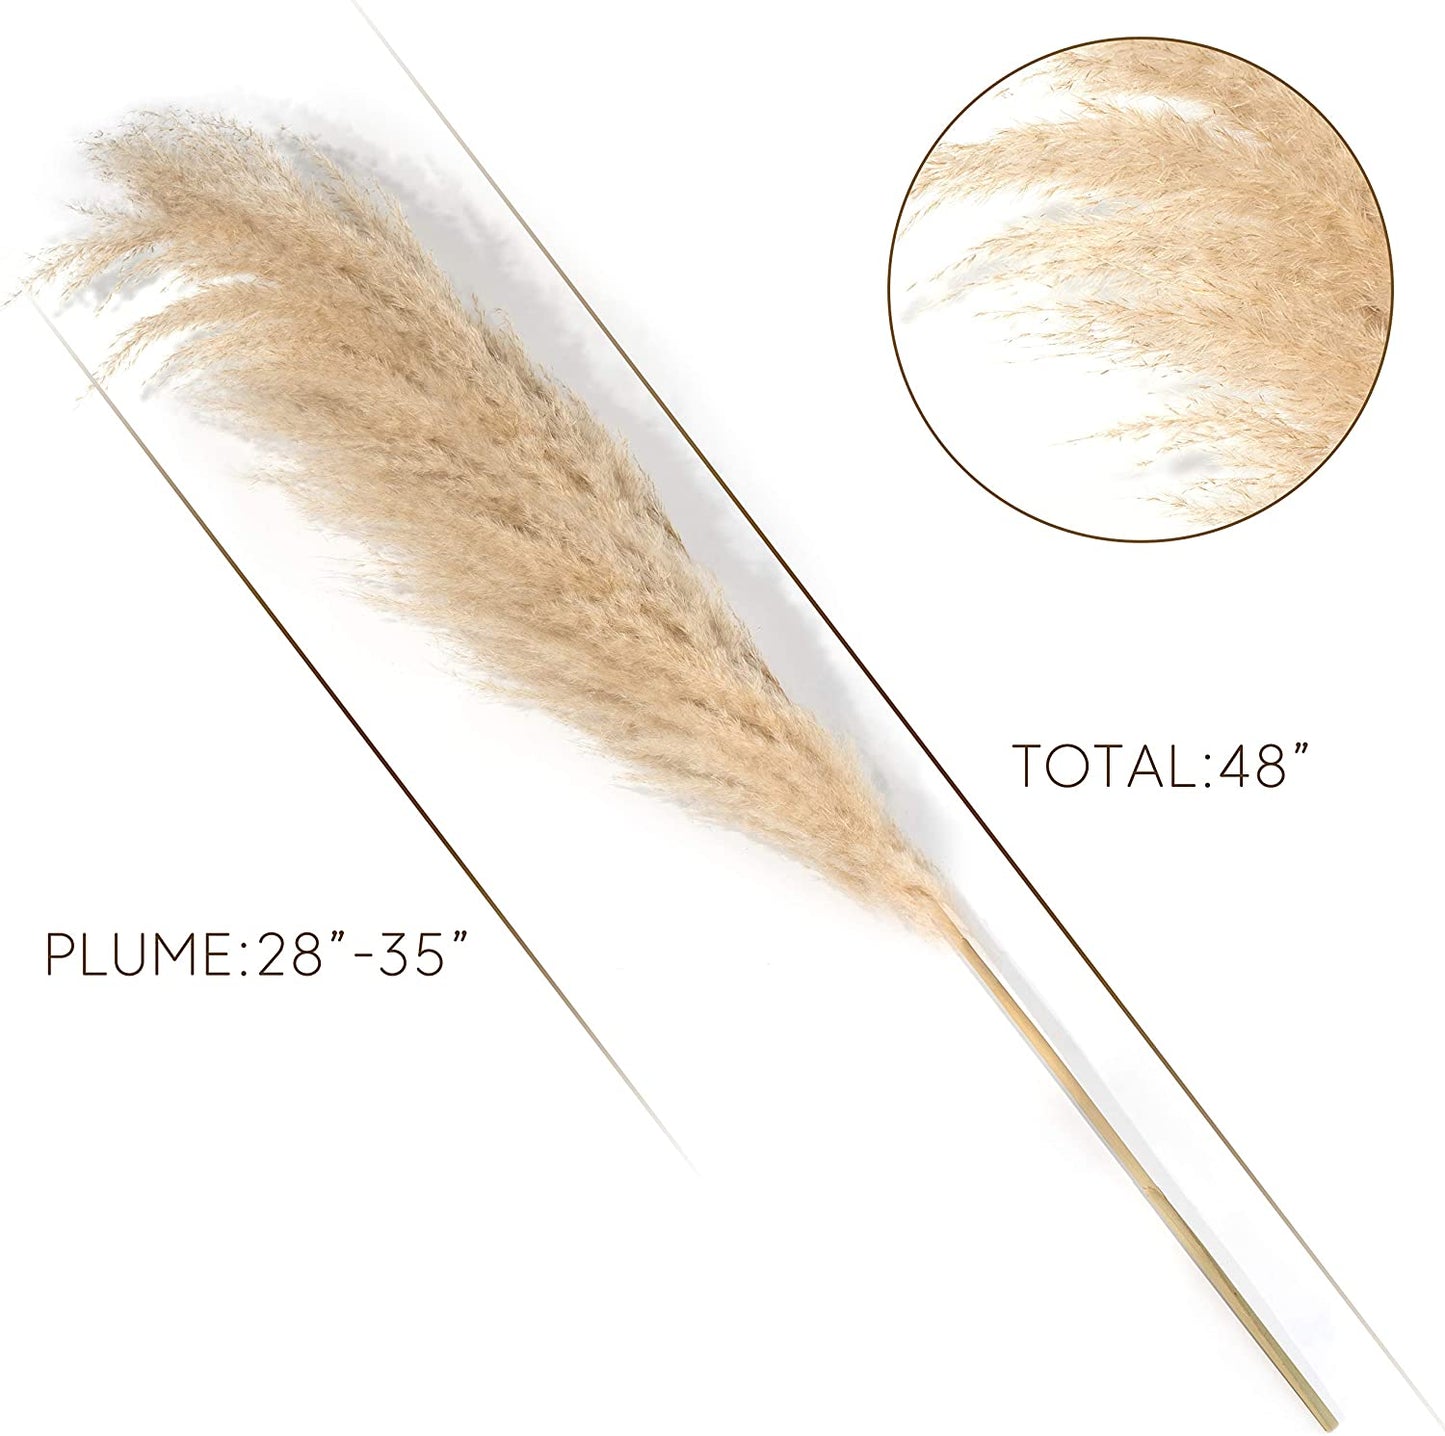 4 Stems Pampas Grass Tall Extra Fluffy 48" (4Ft) - Dried Natural Large Plant for Flower Arrangements Weddings Home Decor – Modern and Luxury Design Decorations (Beige)